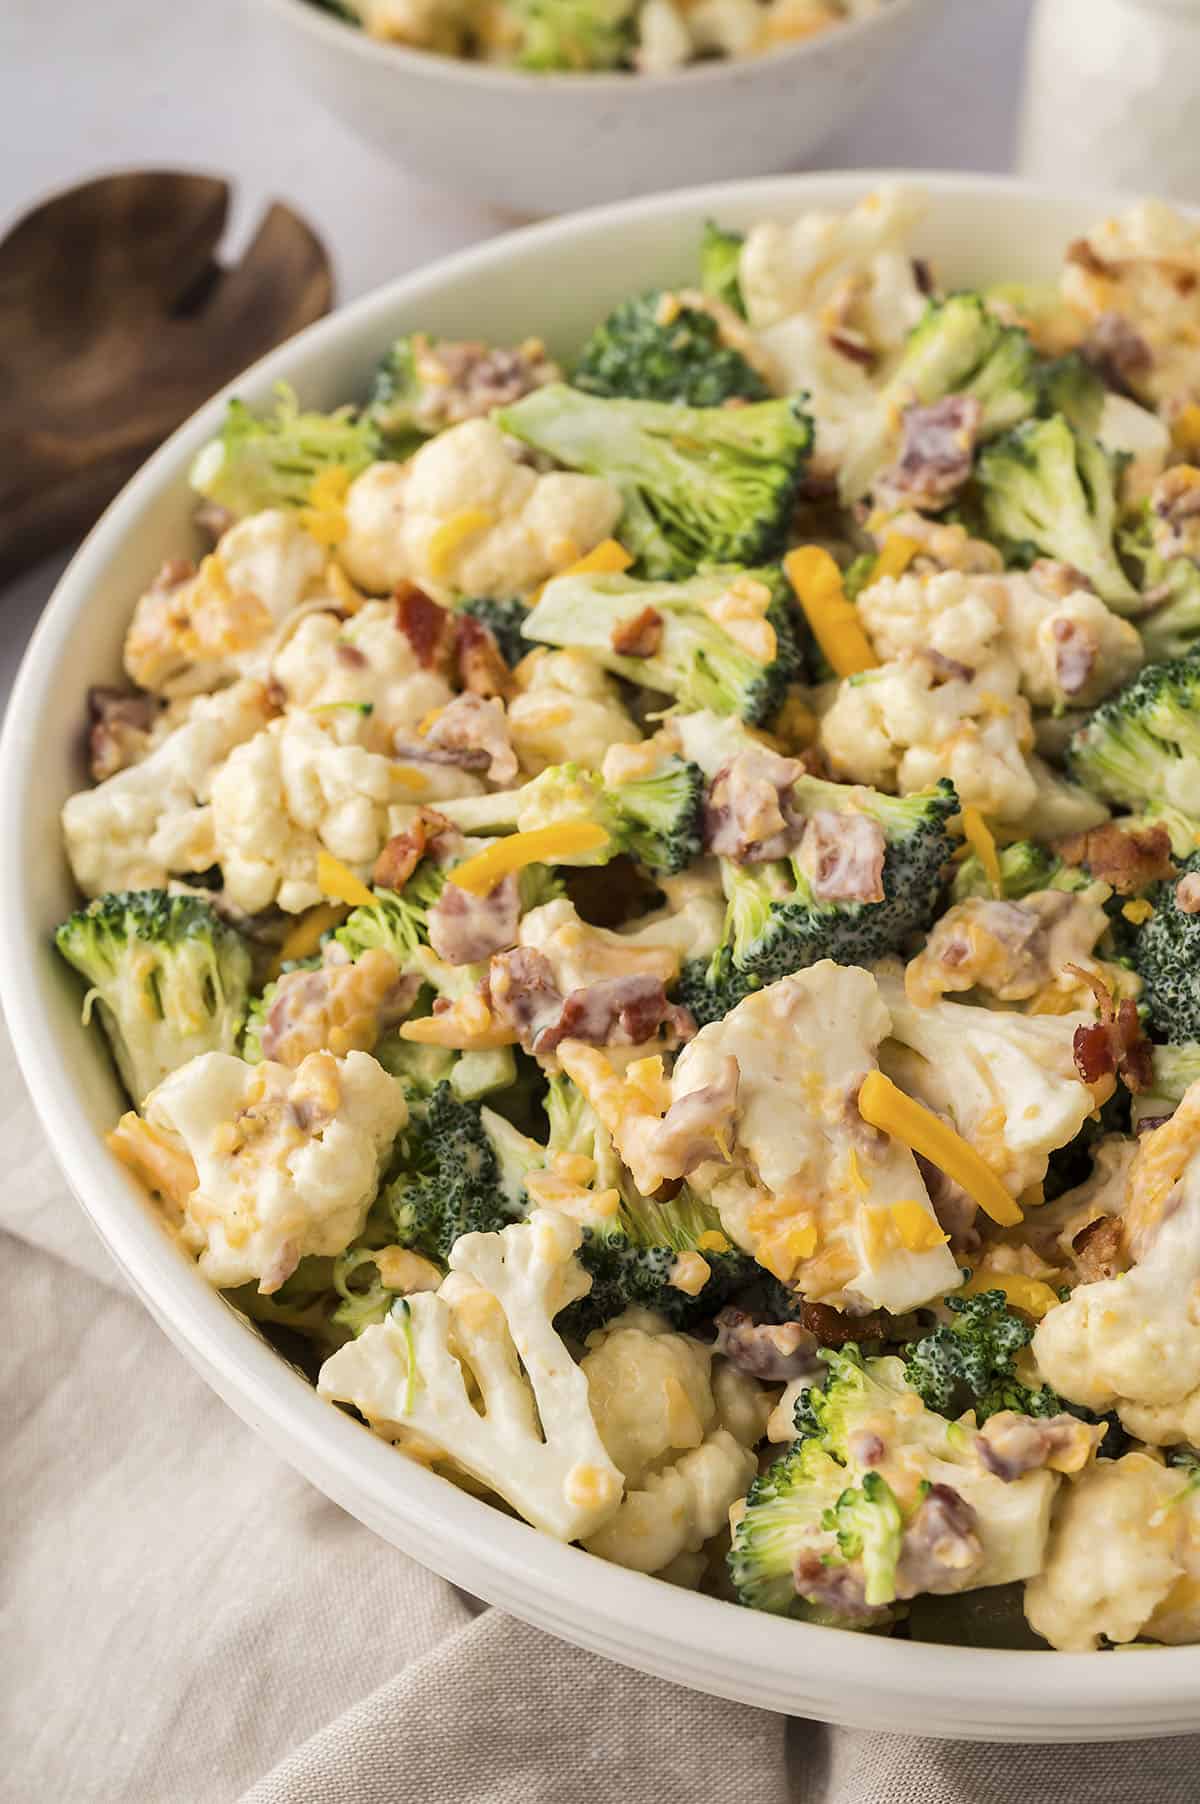 Bowl full of Amish broccoli salad with cauliflower, cheese, and bacon.